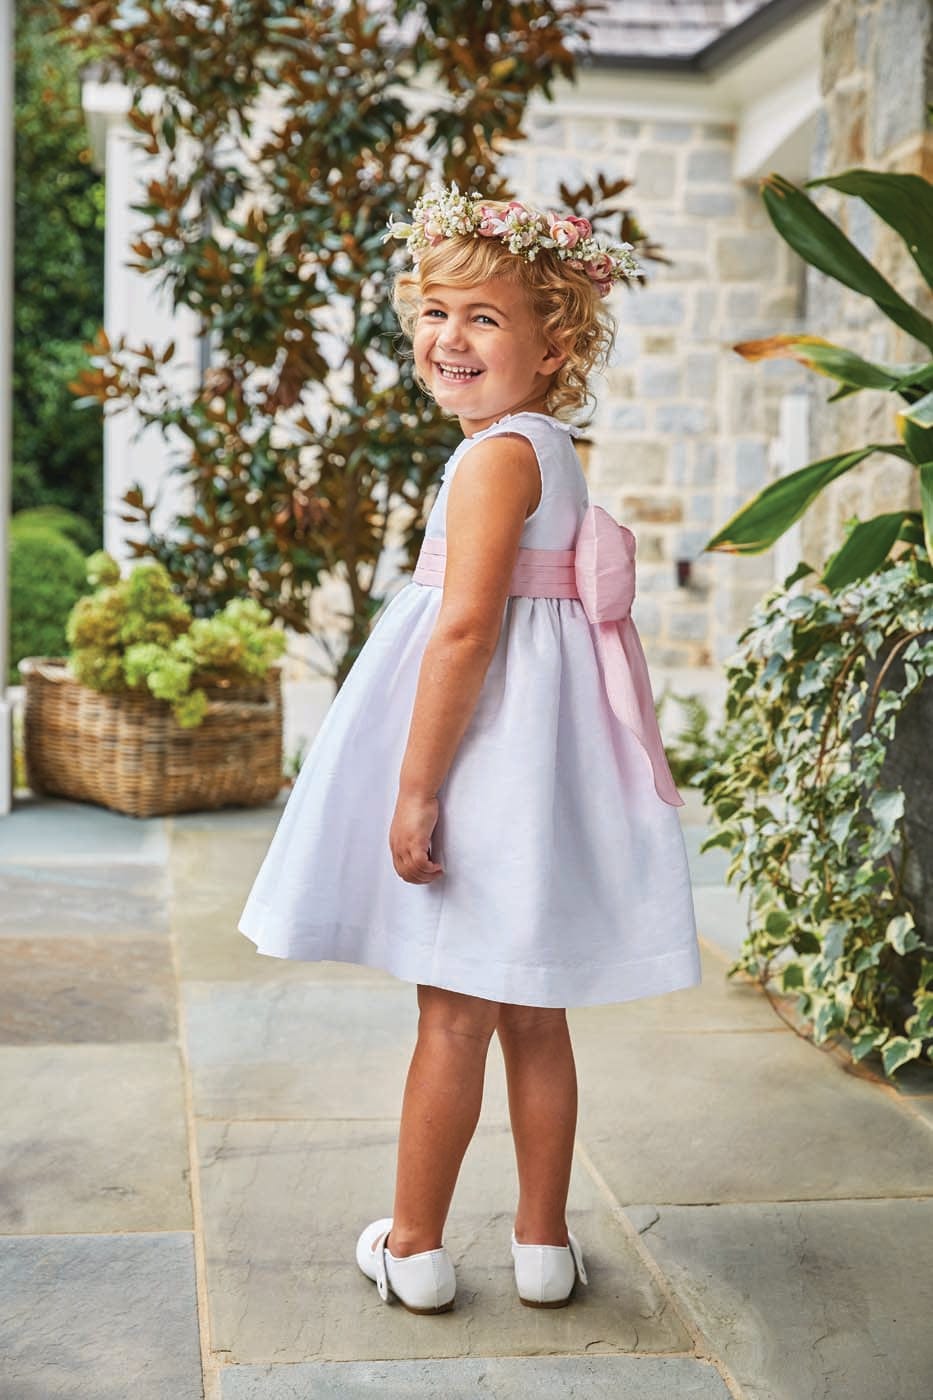 seguridadindustrialcr traditional special occasion dress in white with light pink bow sash 